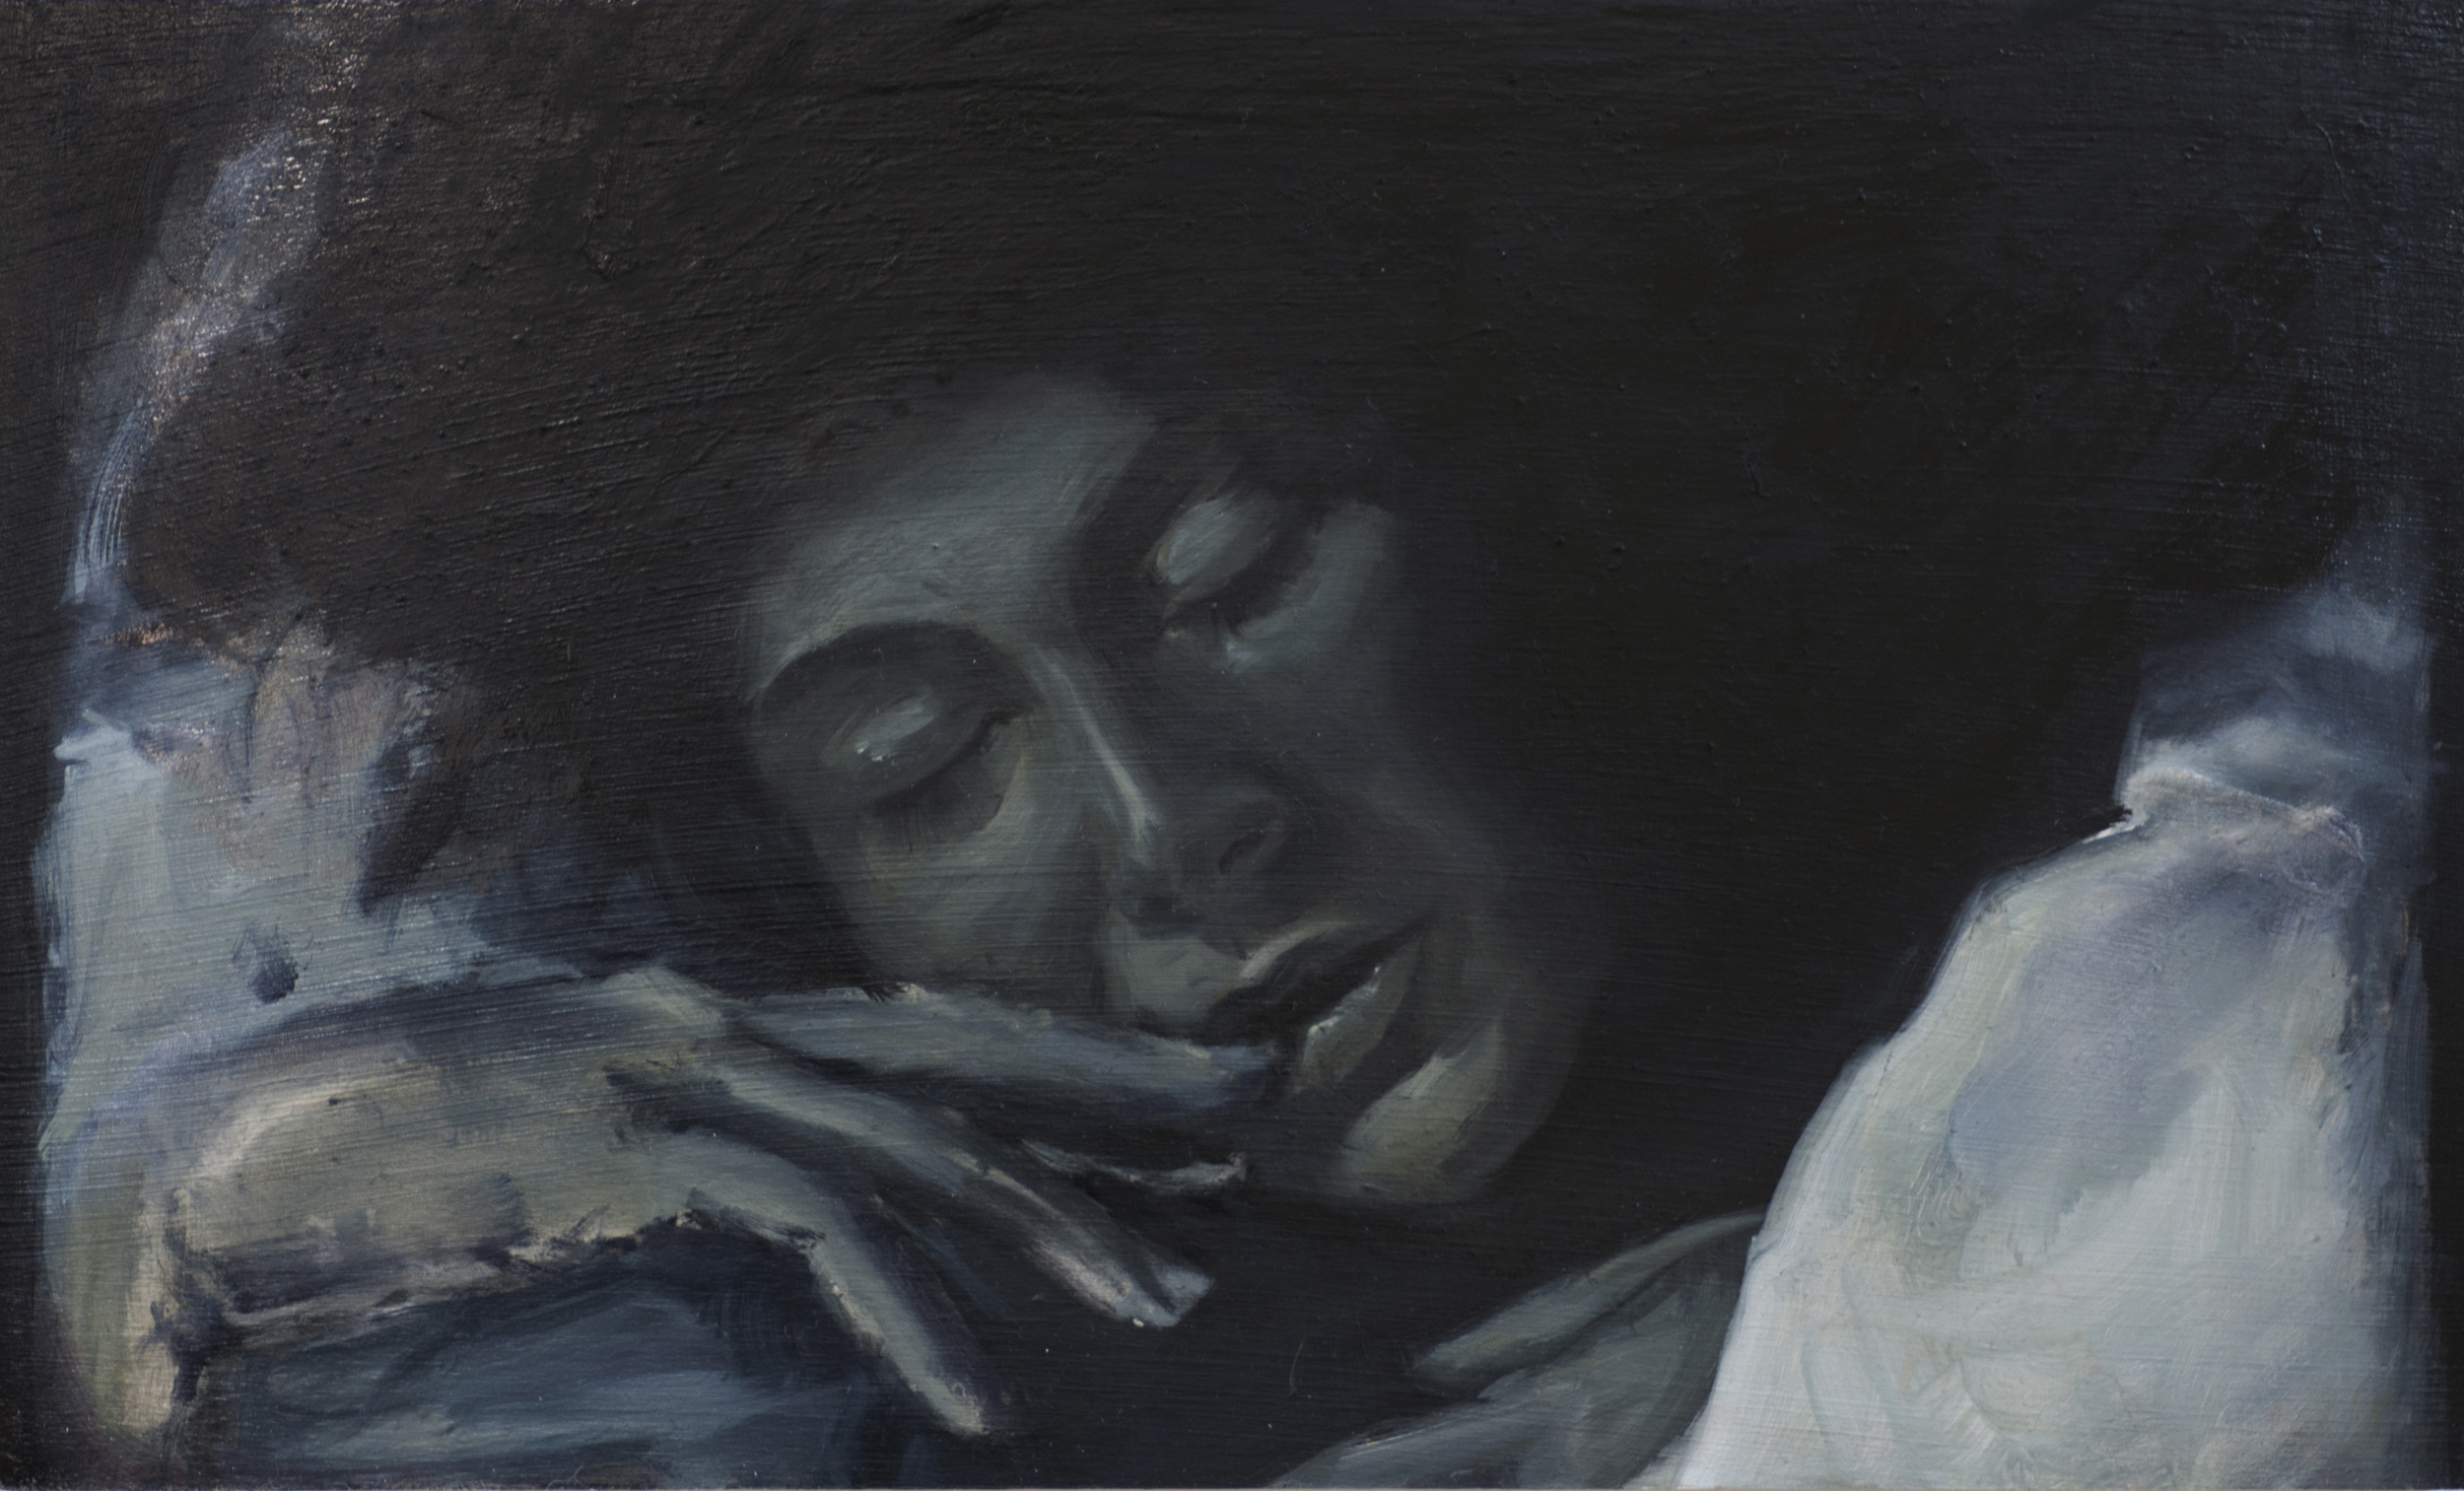   Out of Dreams No. 3 , 2012, oil on wood panel, 12 x 21 inches 